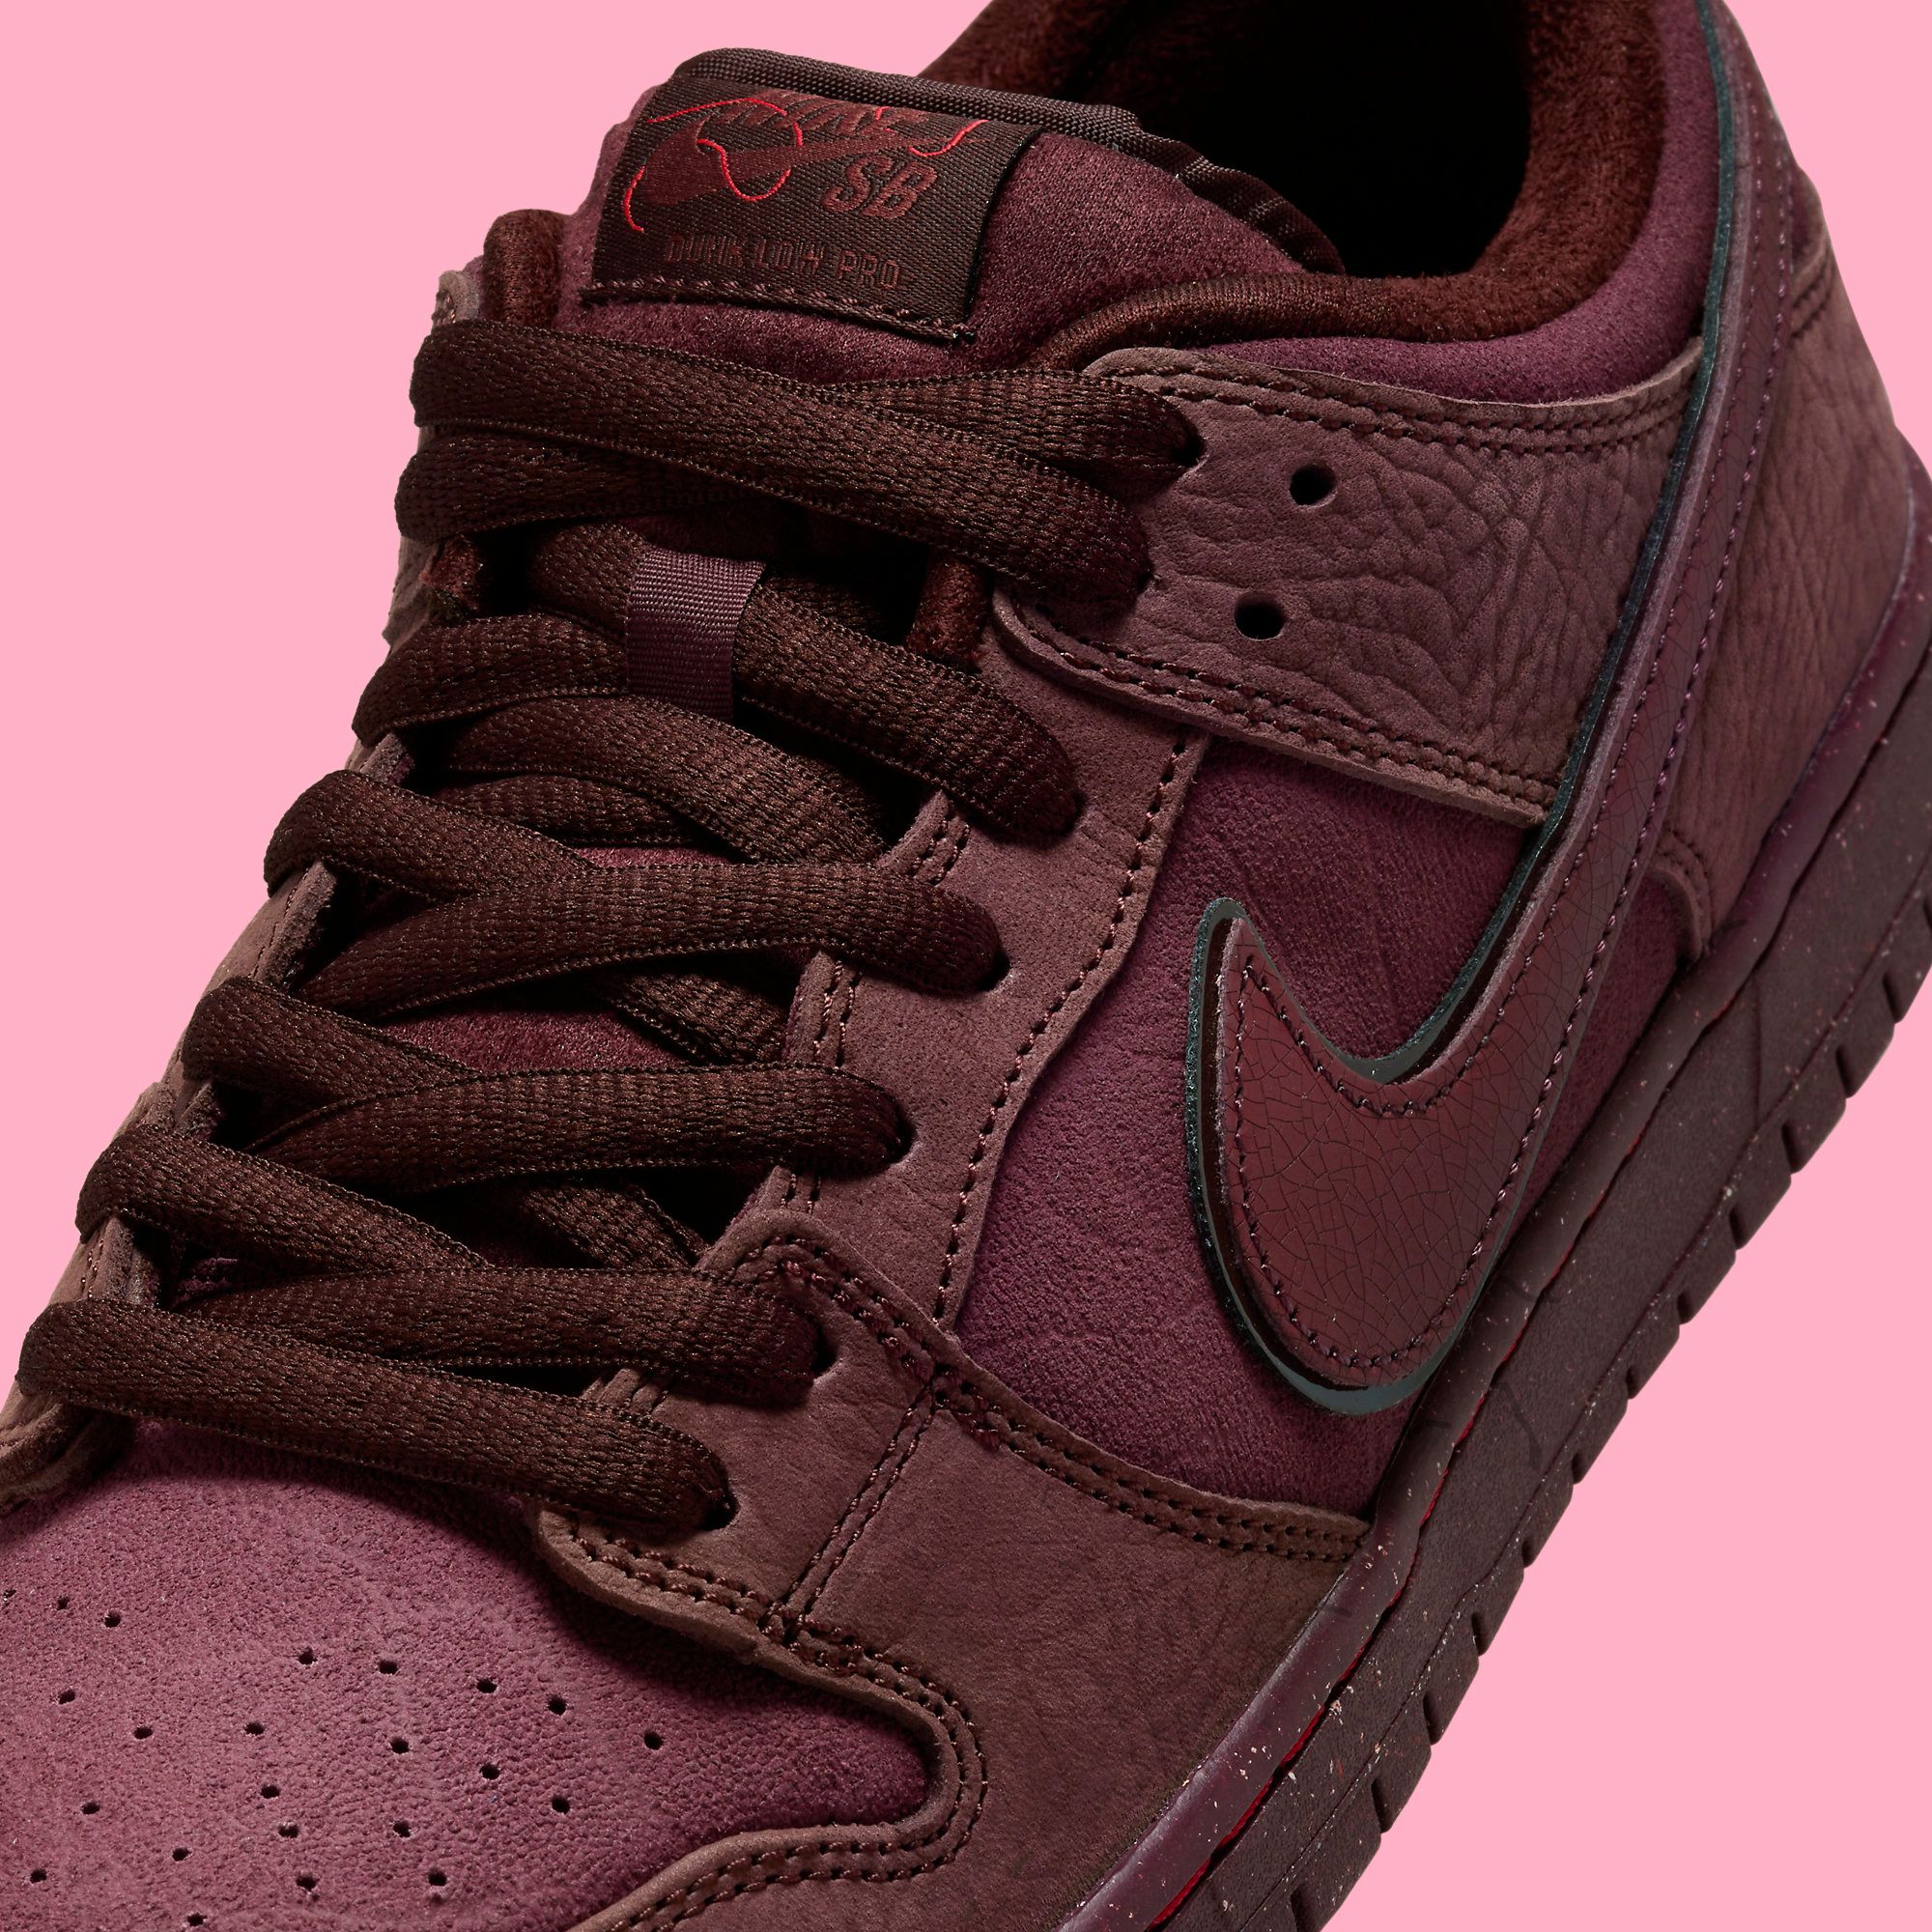 Where to Buy the Nike SB Dunk Low “Valentine's Day” (Burgundy 